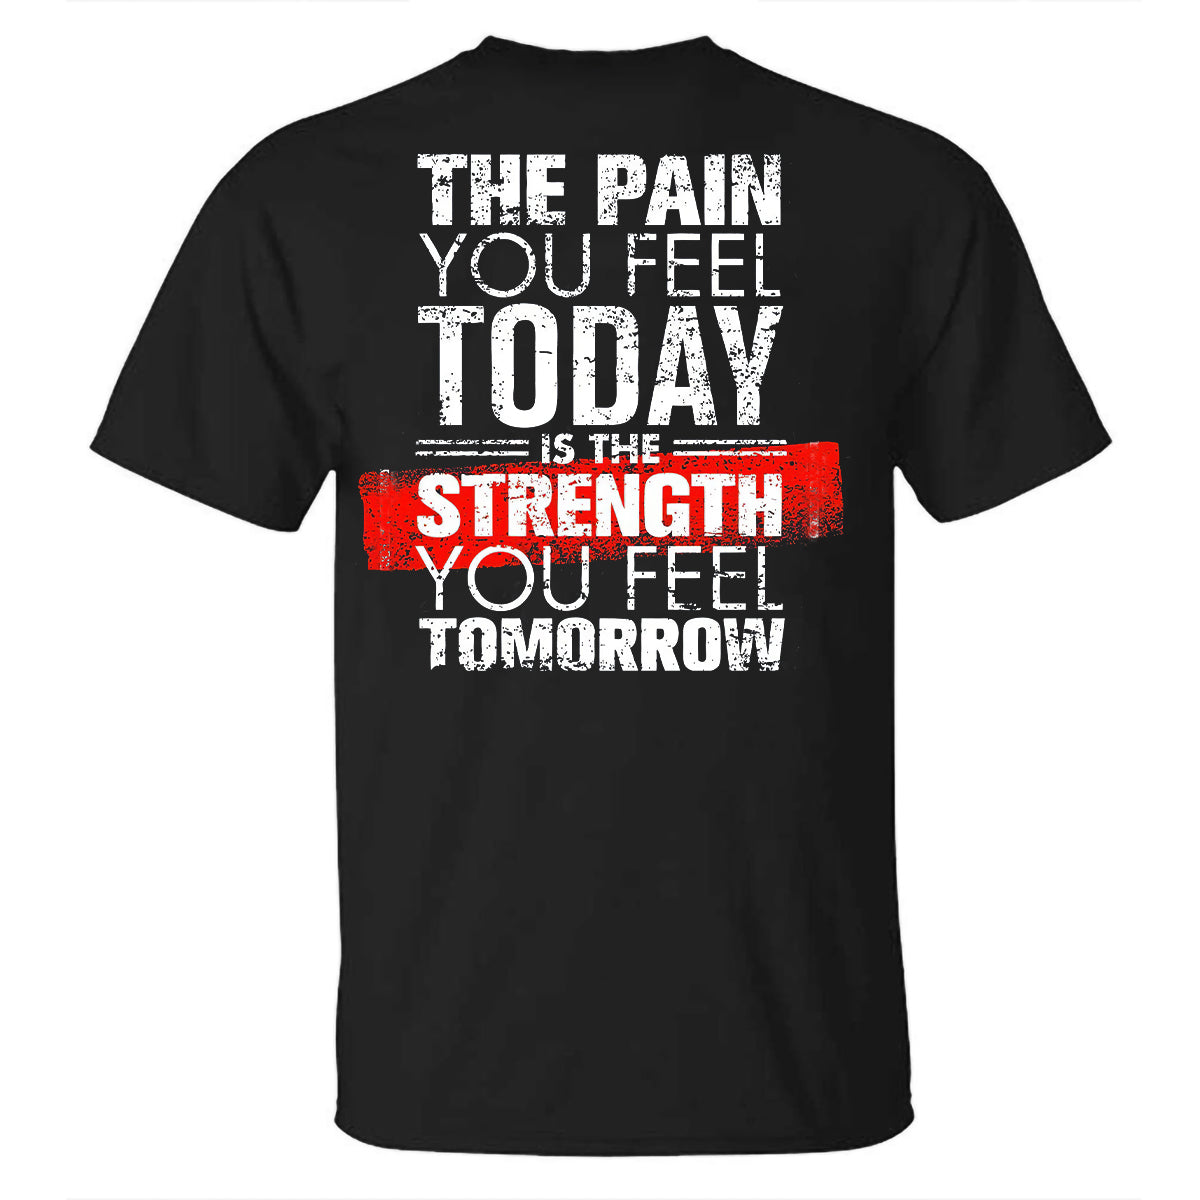 The Pain You Feel Today Is The Strength You Feel Tomorrow Printed T-shirt